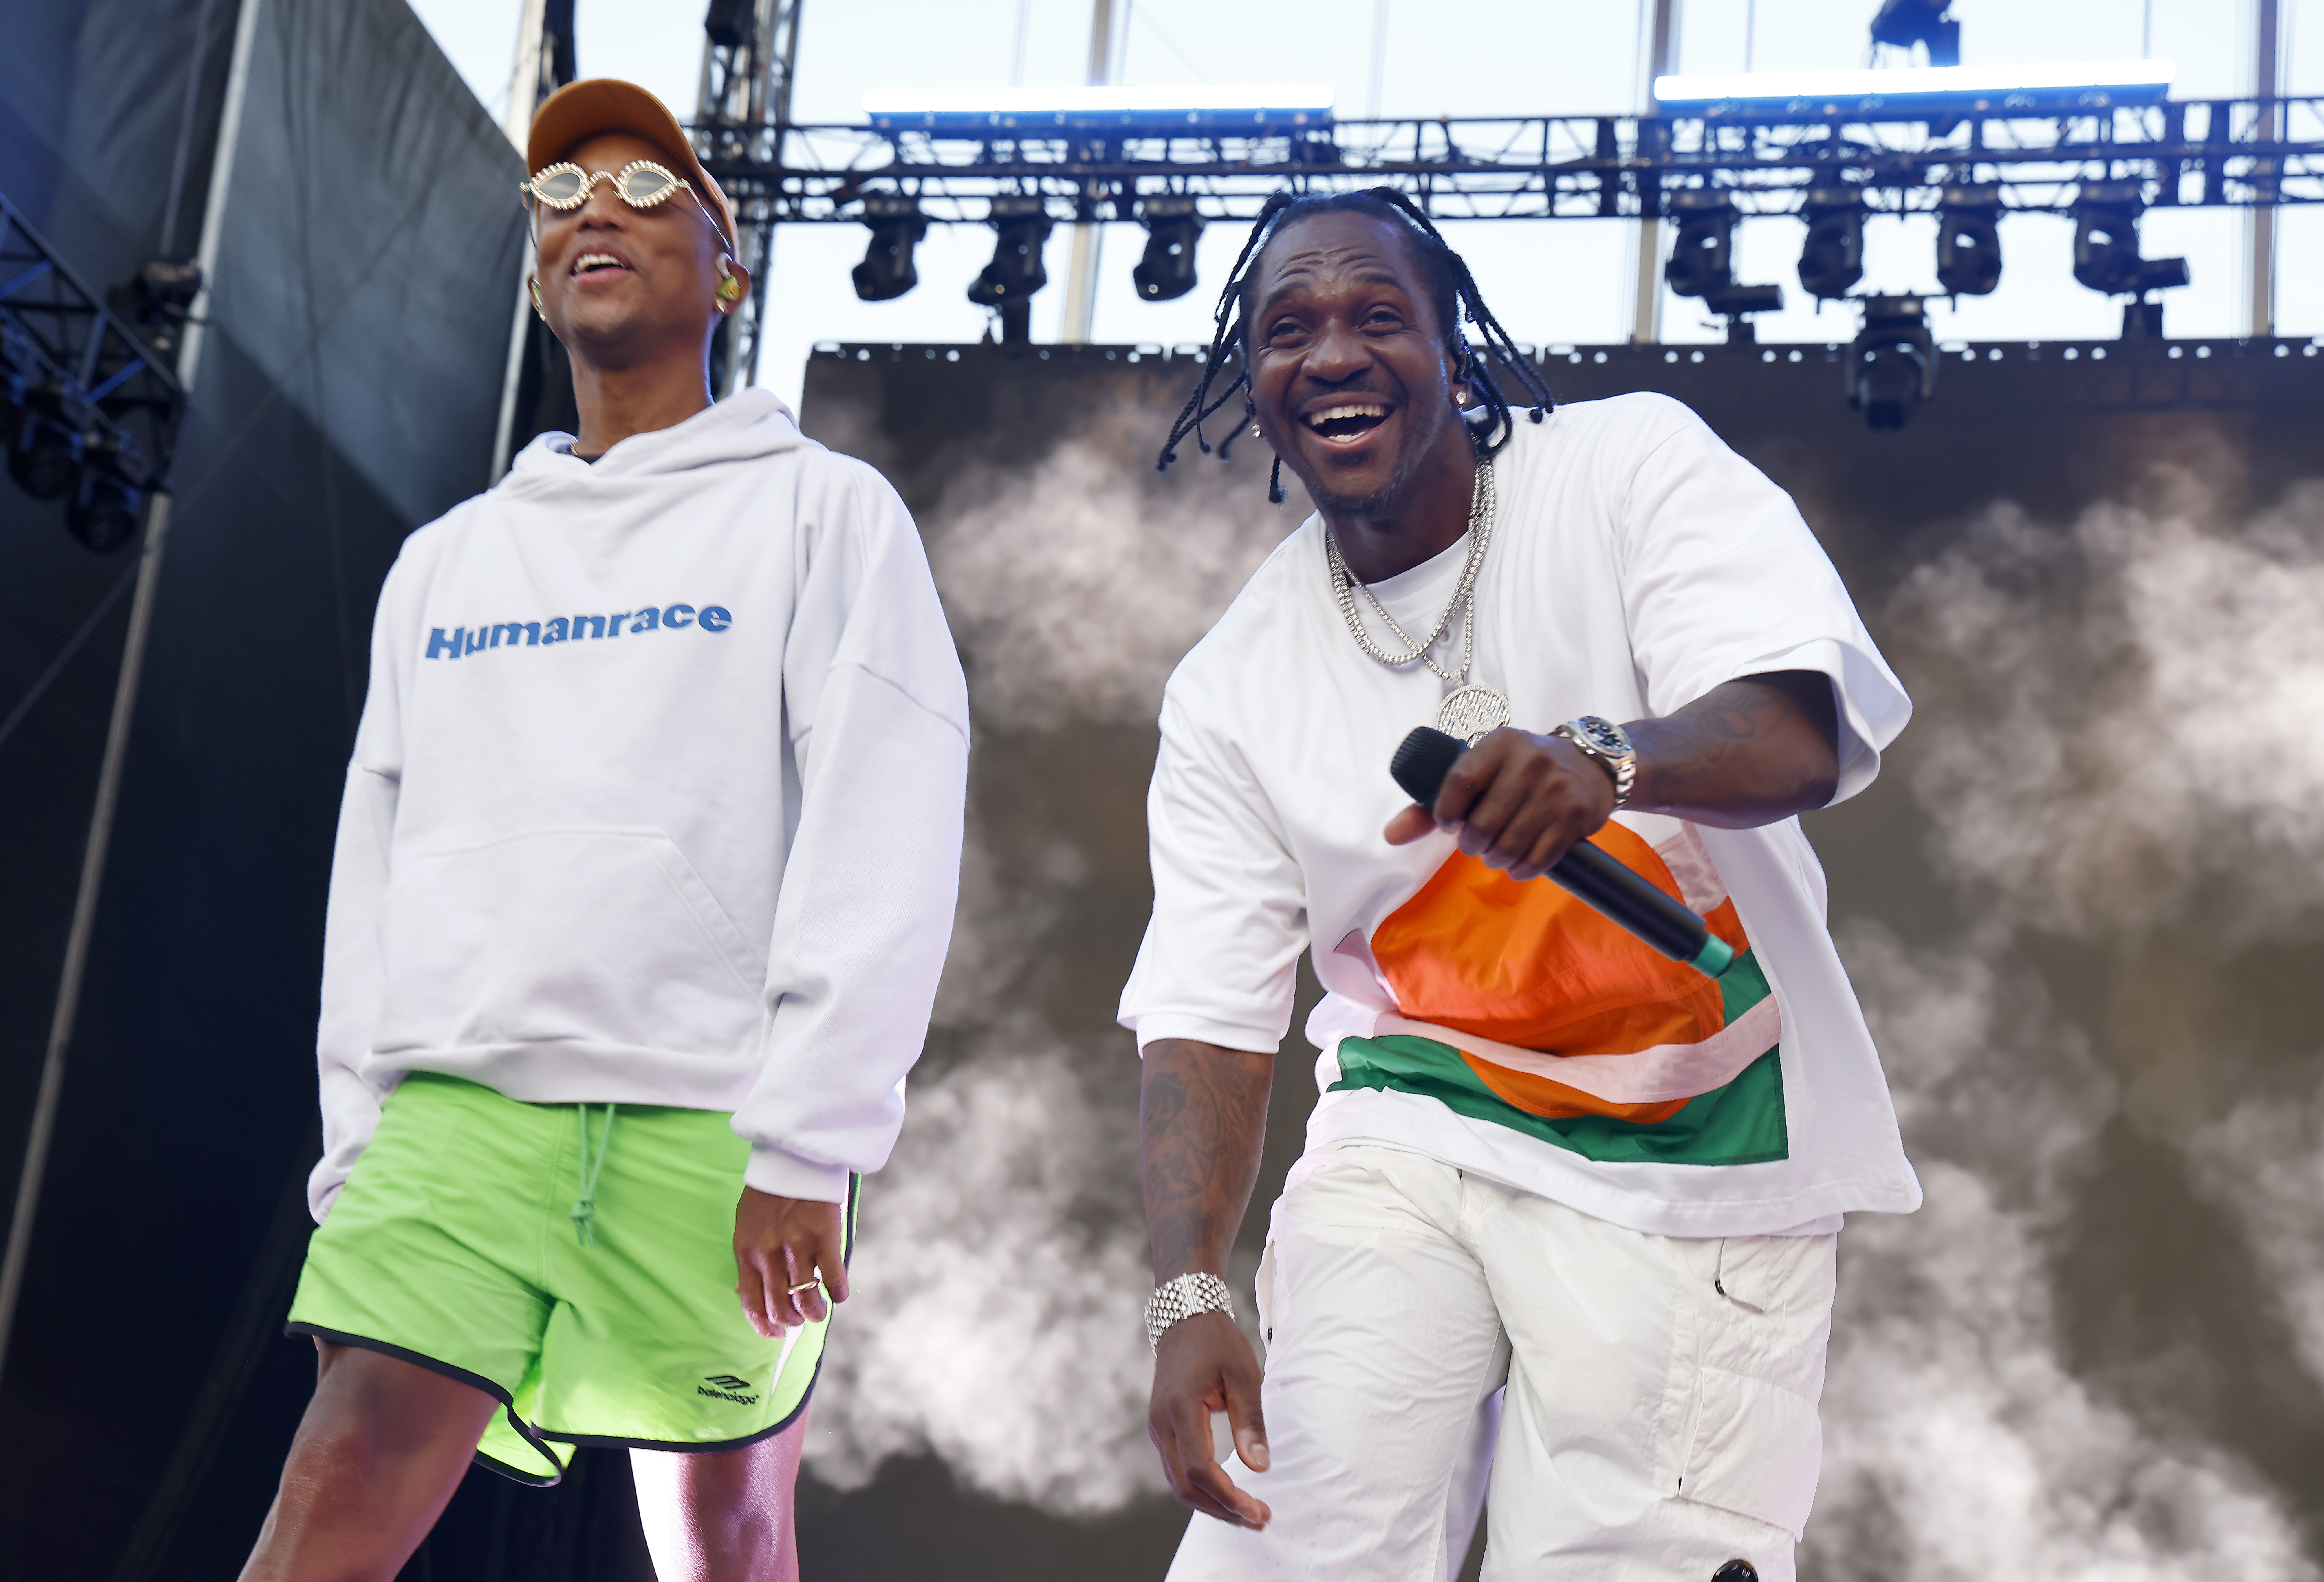 Jay-Z and Beyonce Bopping to New Clipse Song at Pharrell's LV